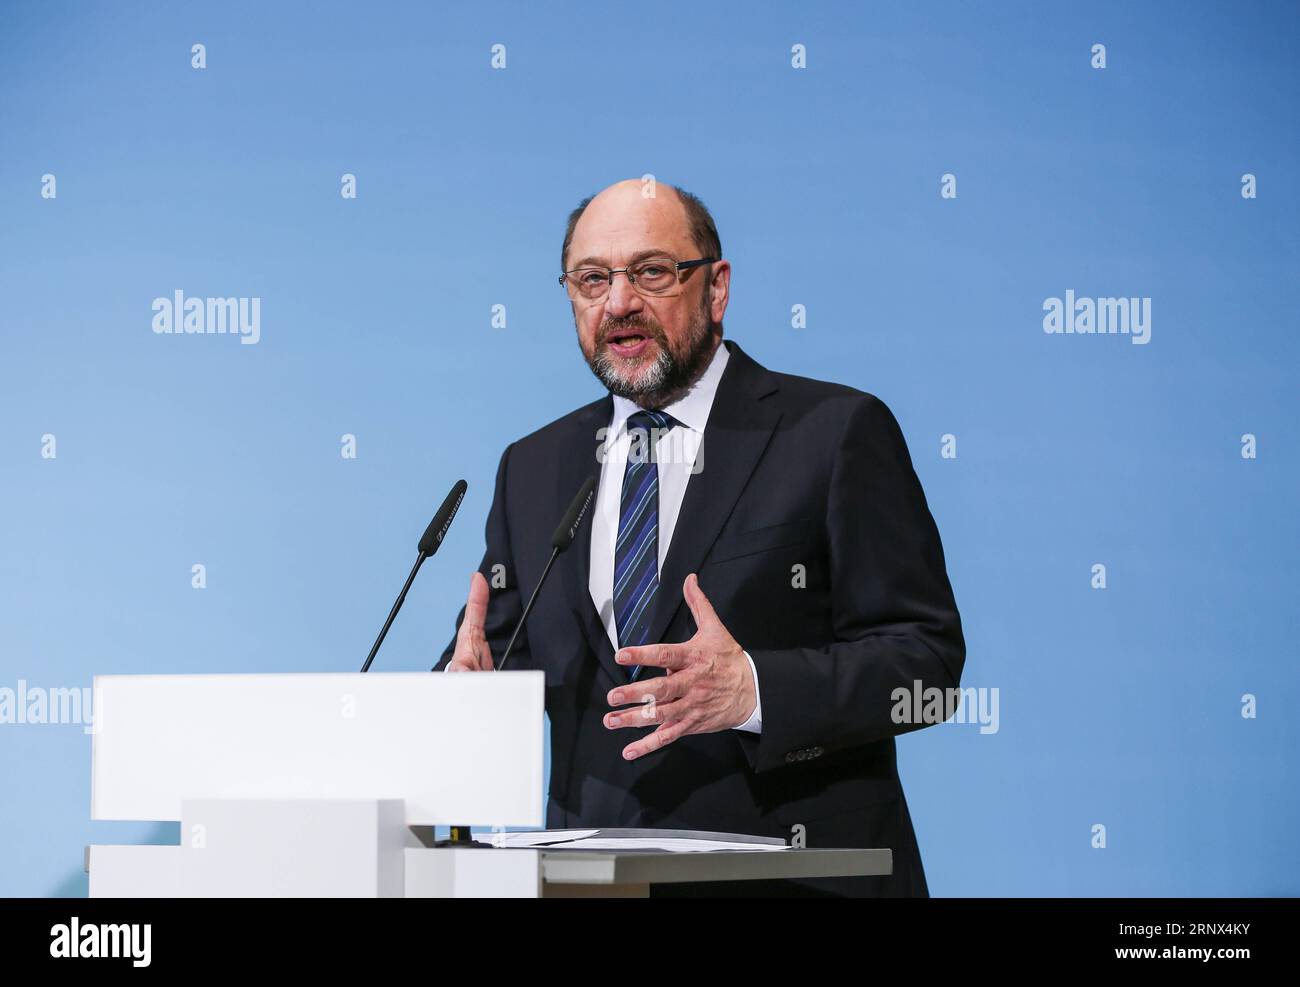 (180112) -- BERLIN, Jan. 12, 2018 -- Leader of German Social Democratic Party (SPD) Martin Schulz speaks during a joint press conference after coalition talks at the headquarters of SPD, in Berlin, Germany, on Jan. 12, 2018. German Chancellor Angela Merkel s conservatives and the Social Democrats (SPD) on Friday achieved a breakthrough in their exploratory talks aimed at forming a new coalition government, local media reported. )(srb) GERMANY-BERLIN-COALITION TALKS-BREAKTHROUGH ShanxYuqi PUBLICATIONxNOTxINxCHN Stock Photo